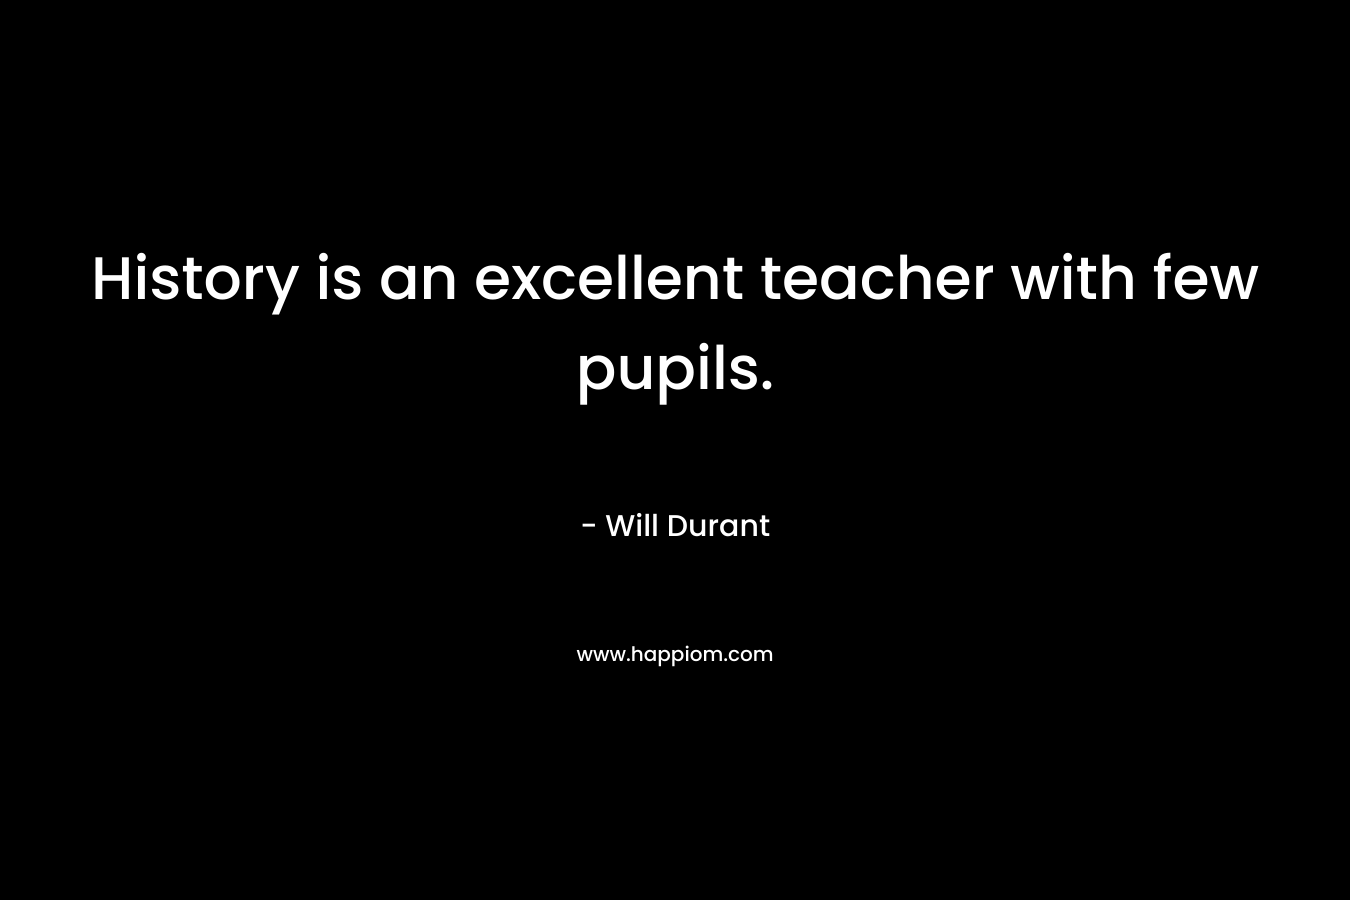 History is an excellent teacher with few pupils. – Will Durant